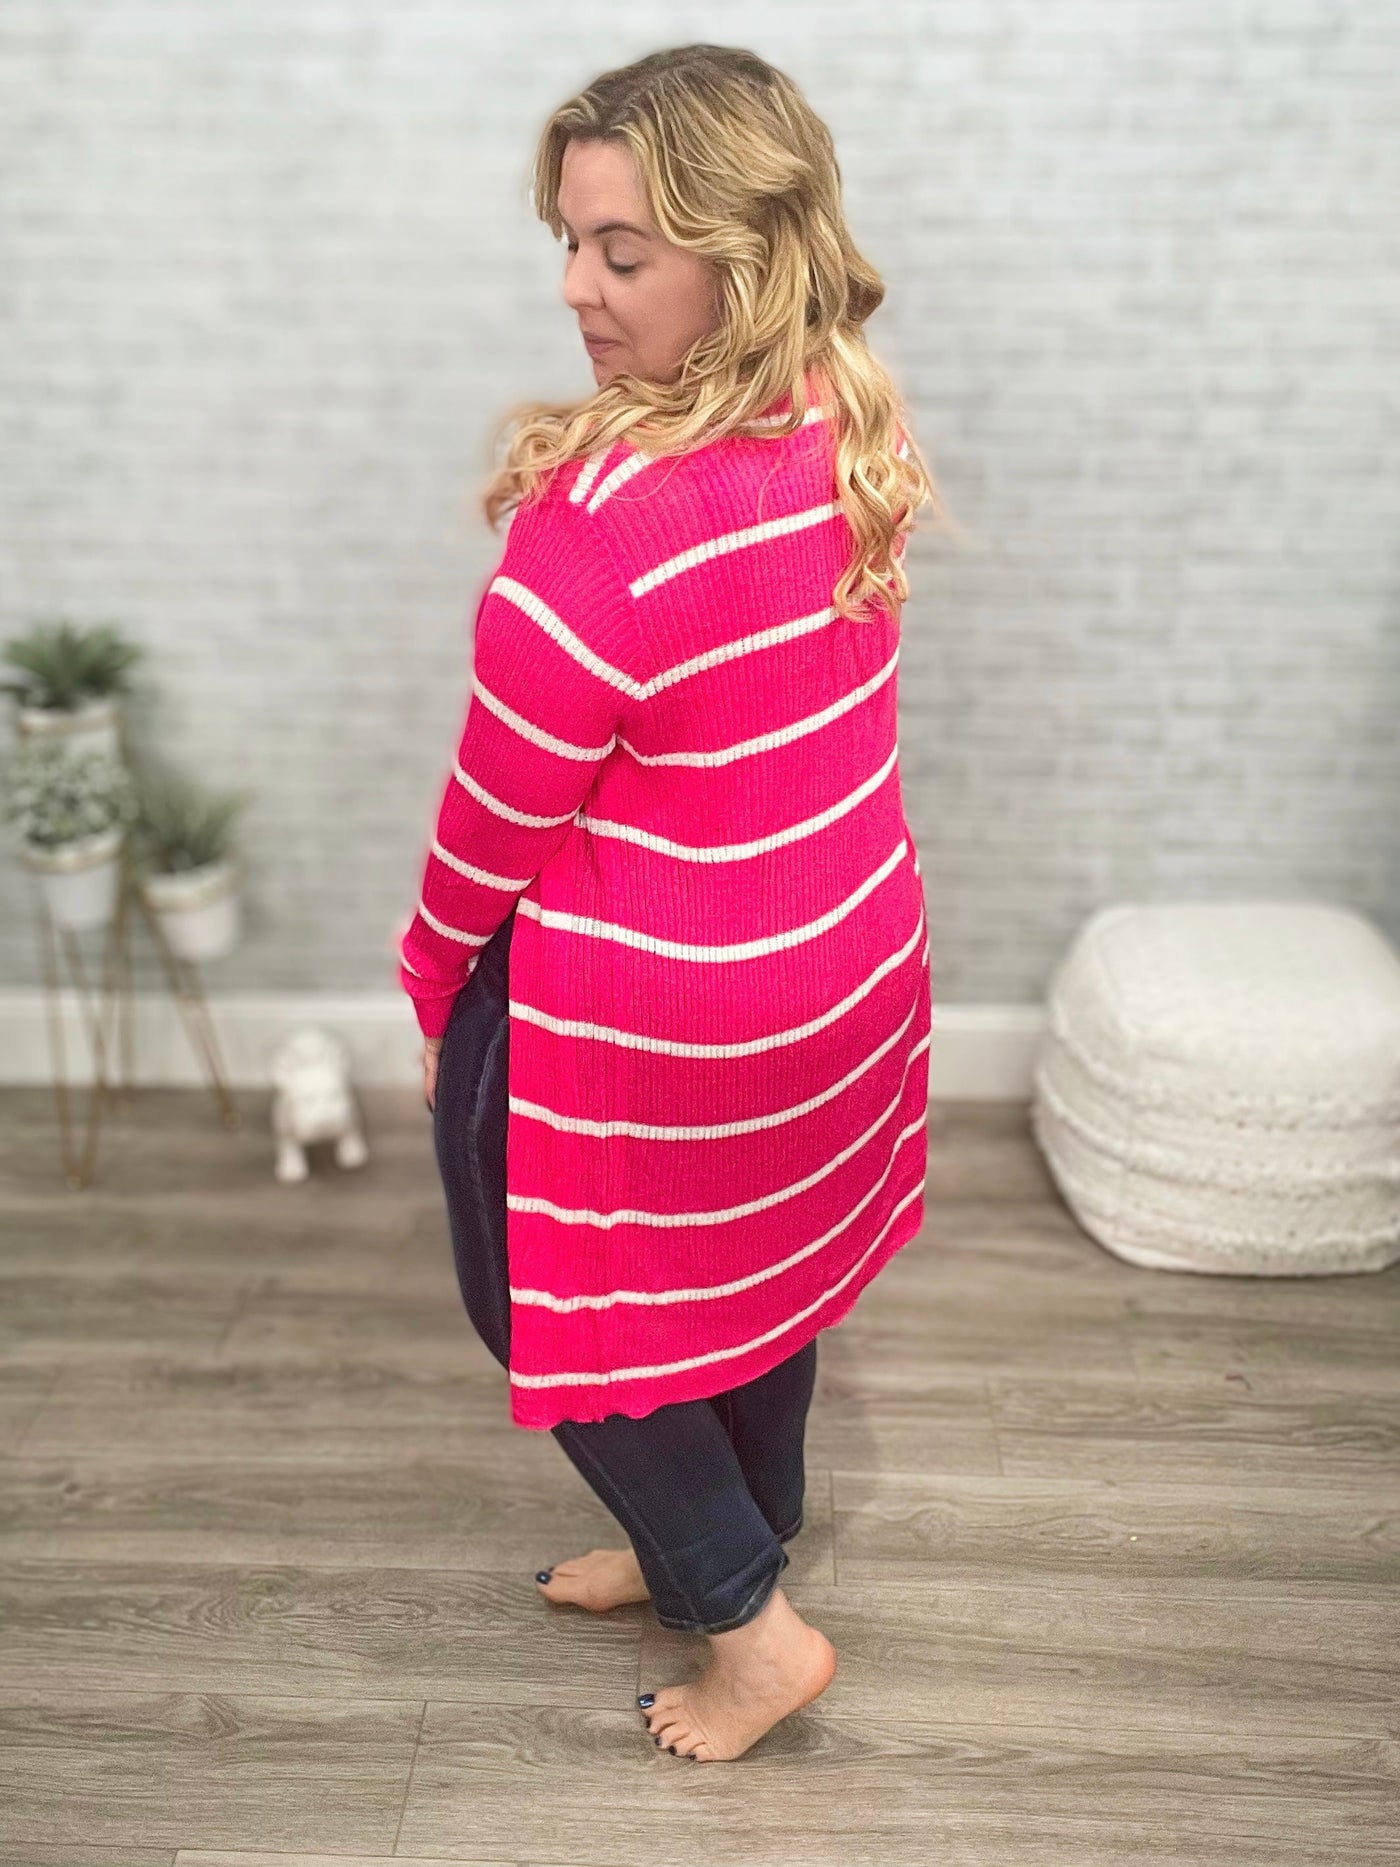 Hot Pink and White Striped Lightweight Cardigan - Jess Lea